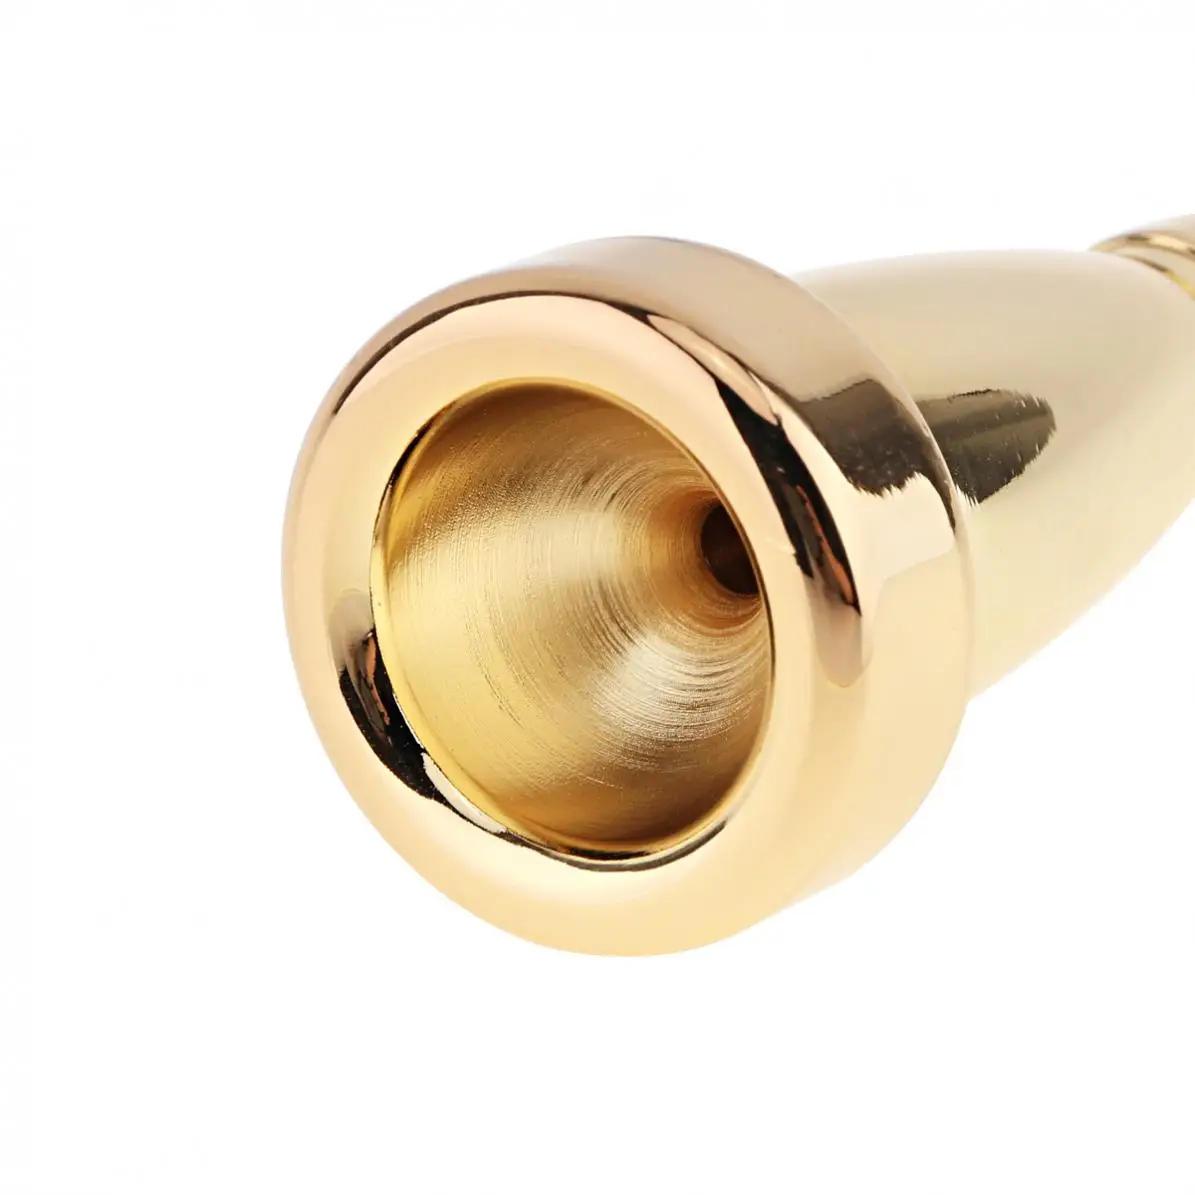 HENGYEE Gold Plated Trumpet Mouthpiece 3C 5C 7C Compatible with Yamaha Bach Conn King Replacement Musical Instruments Accessories 